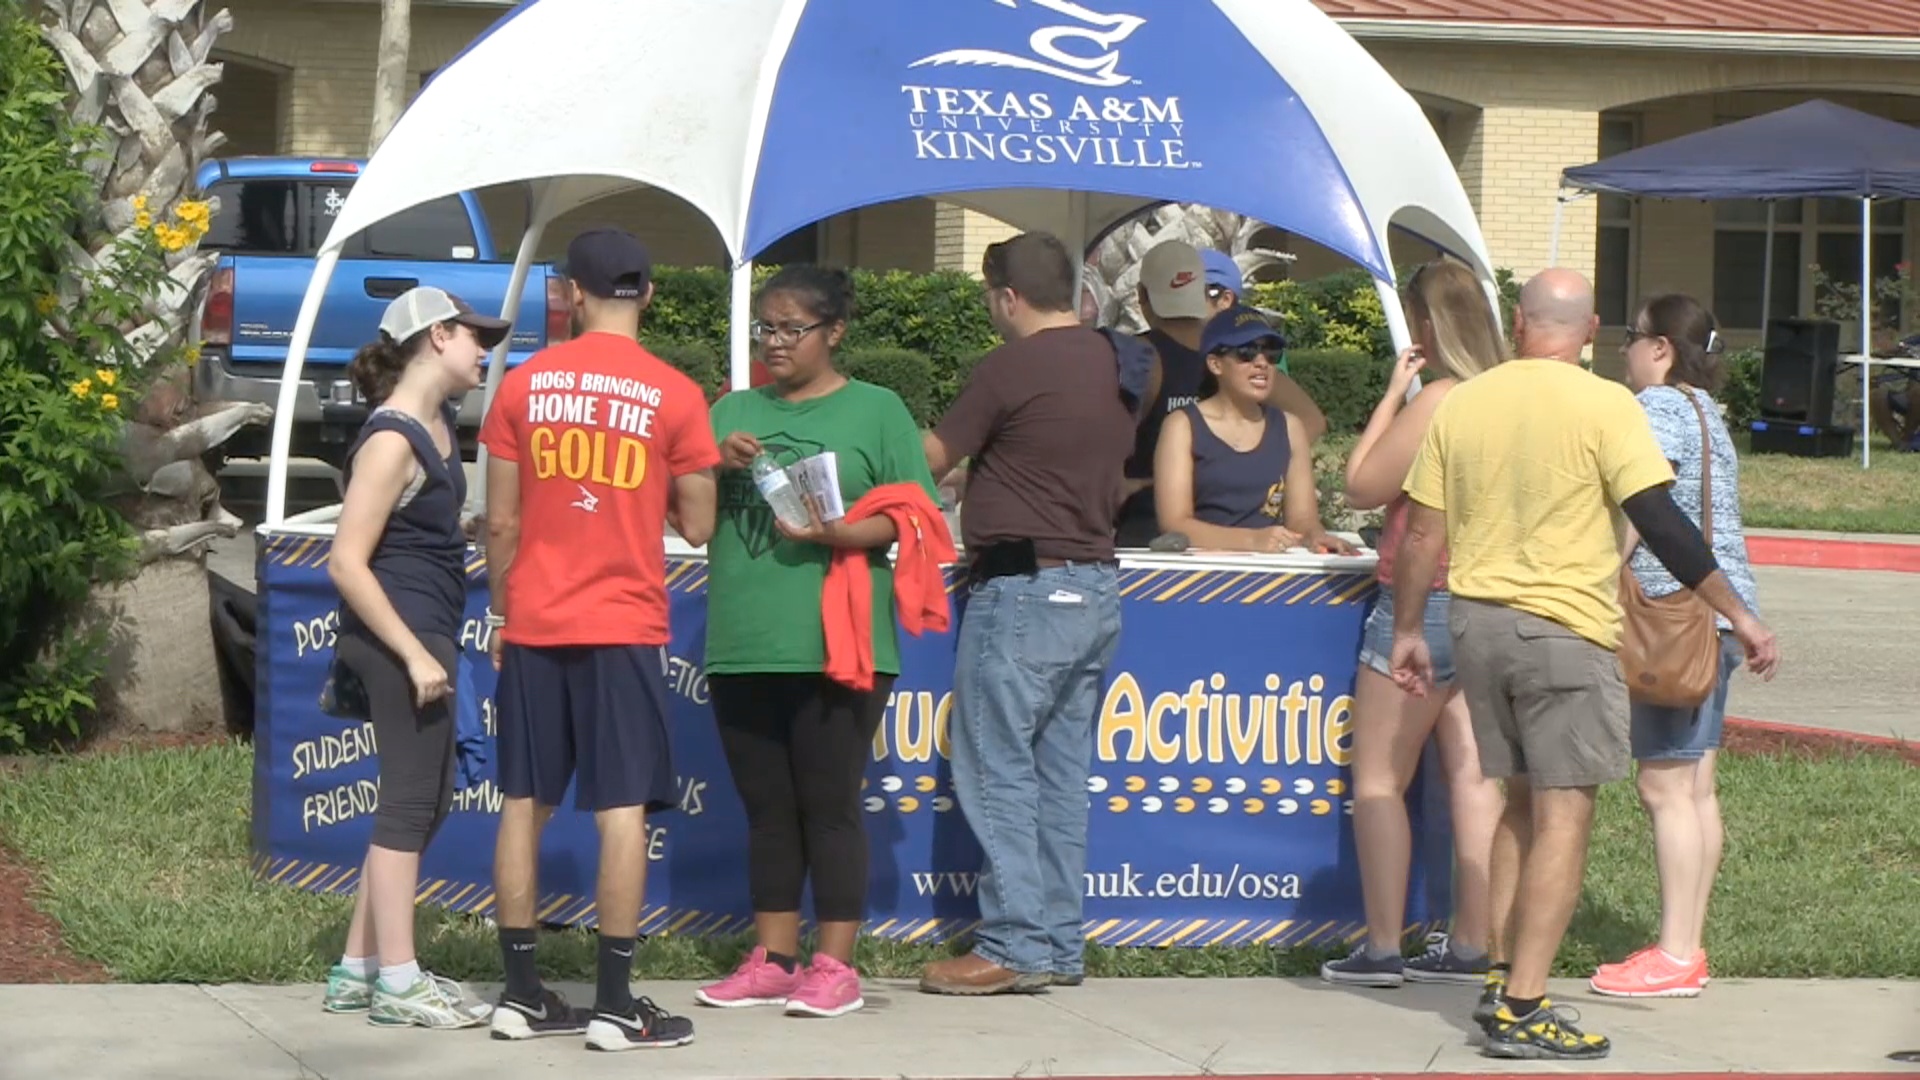 "Movein Day" for students at Texas A & M University Kingsville